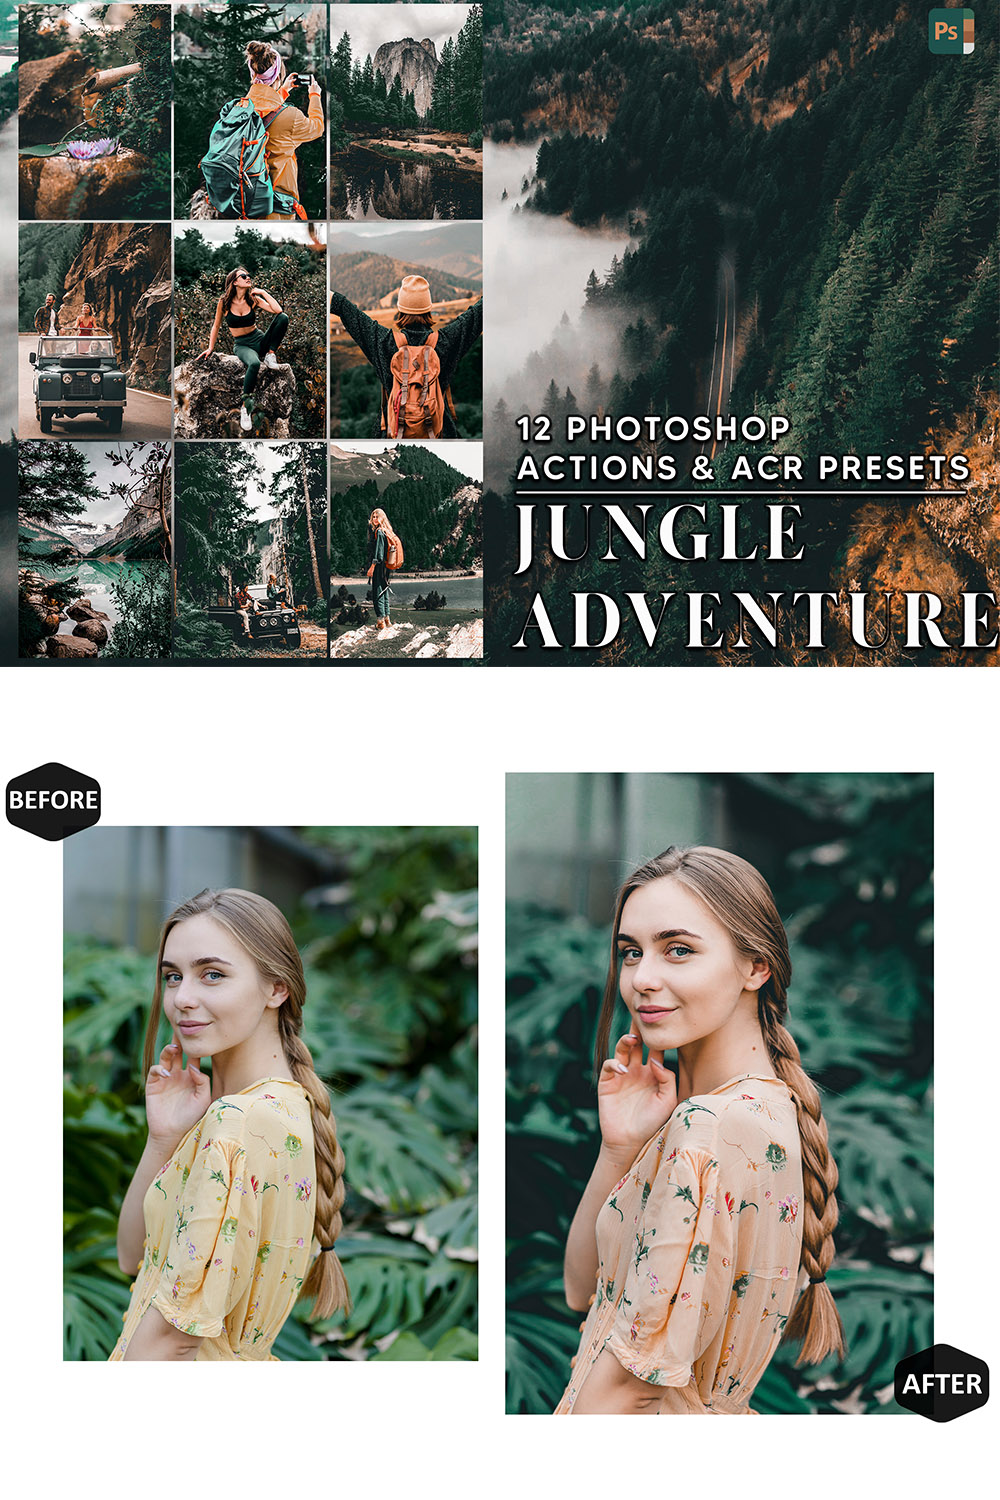 12 Photoshop Actions, Jungle Adventure Ps Action, Forest Moody ACR Preset, Travel Woman Ps Filter, Atn Portrait And Lifestyle Theme For Instagram, Blogger pinterest preview image.